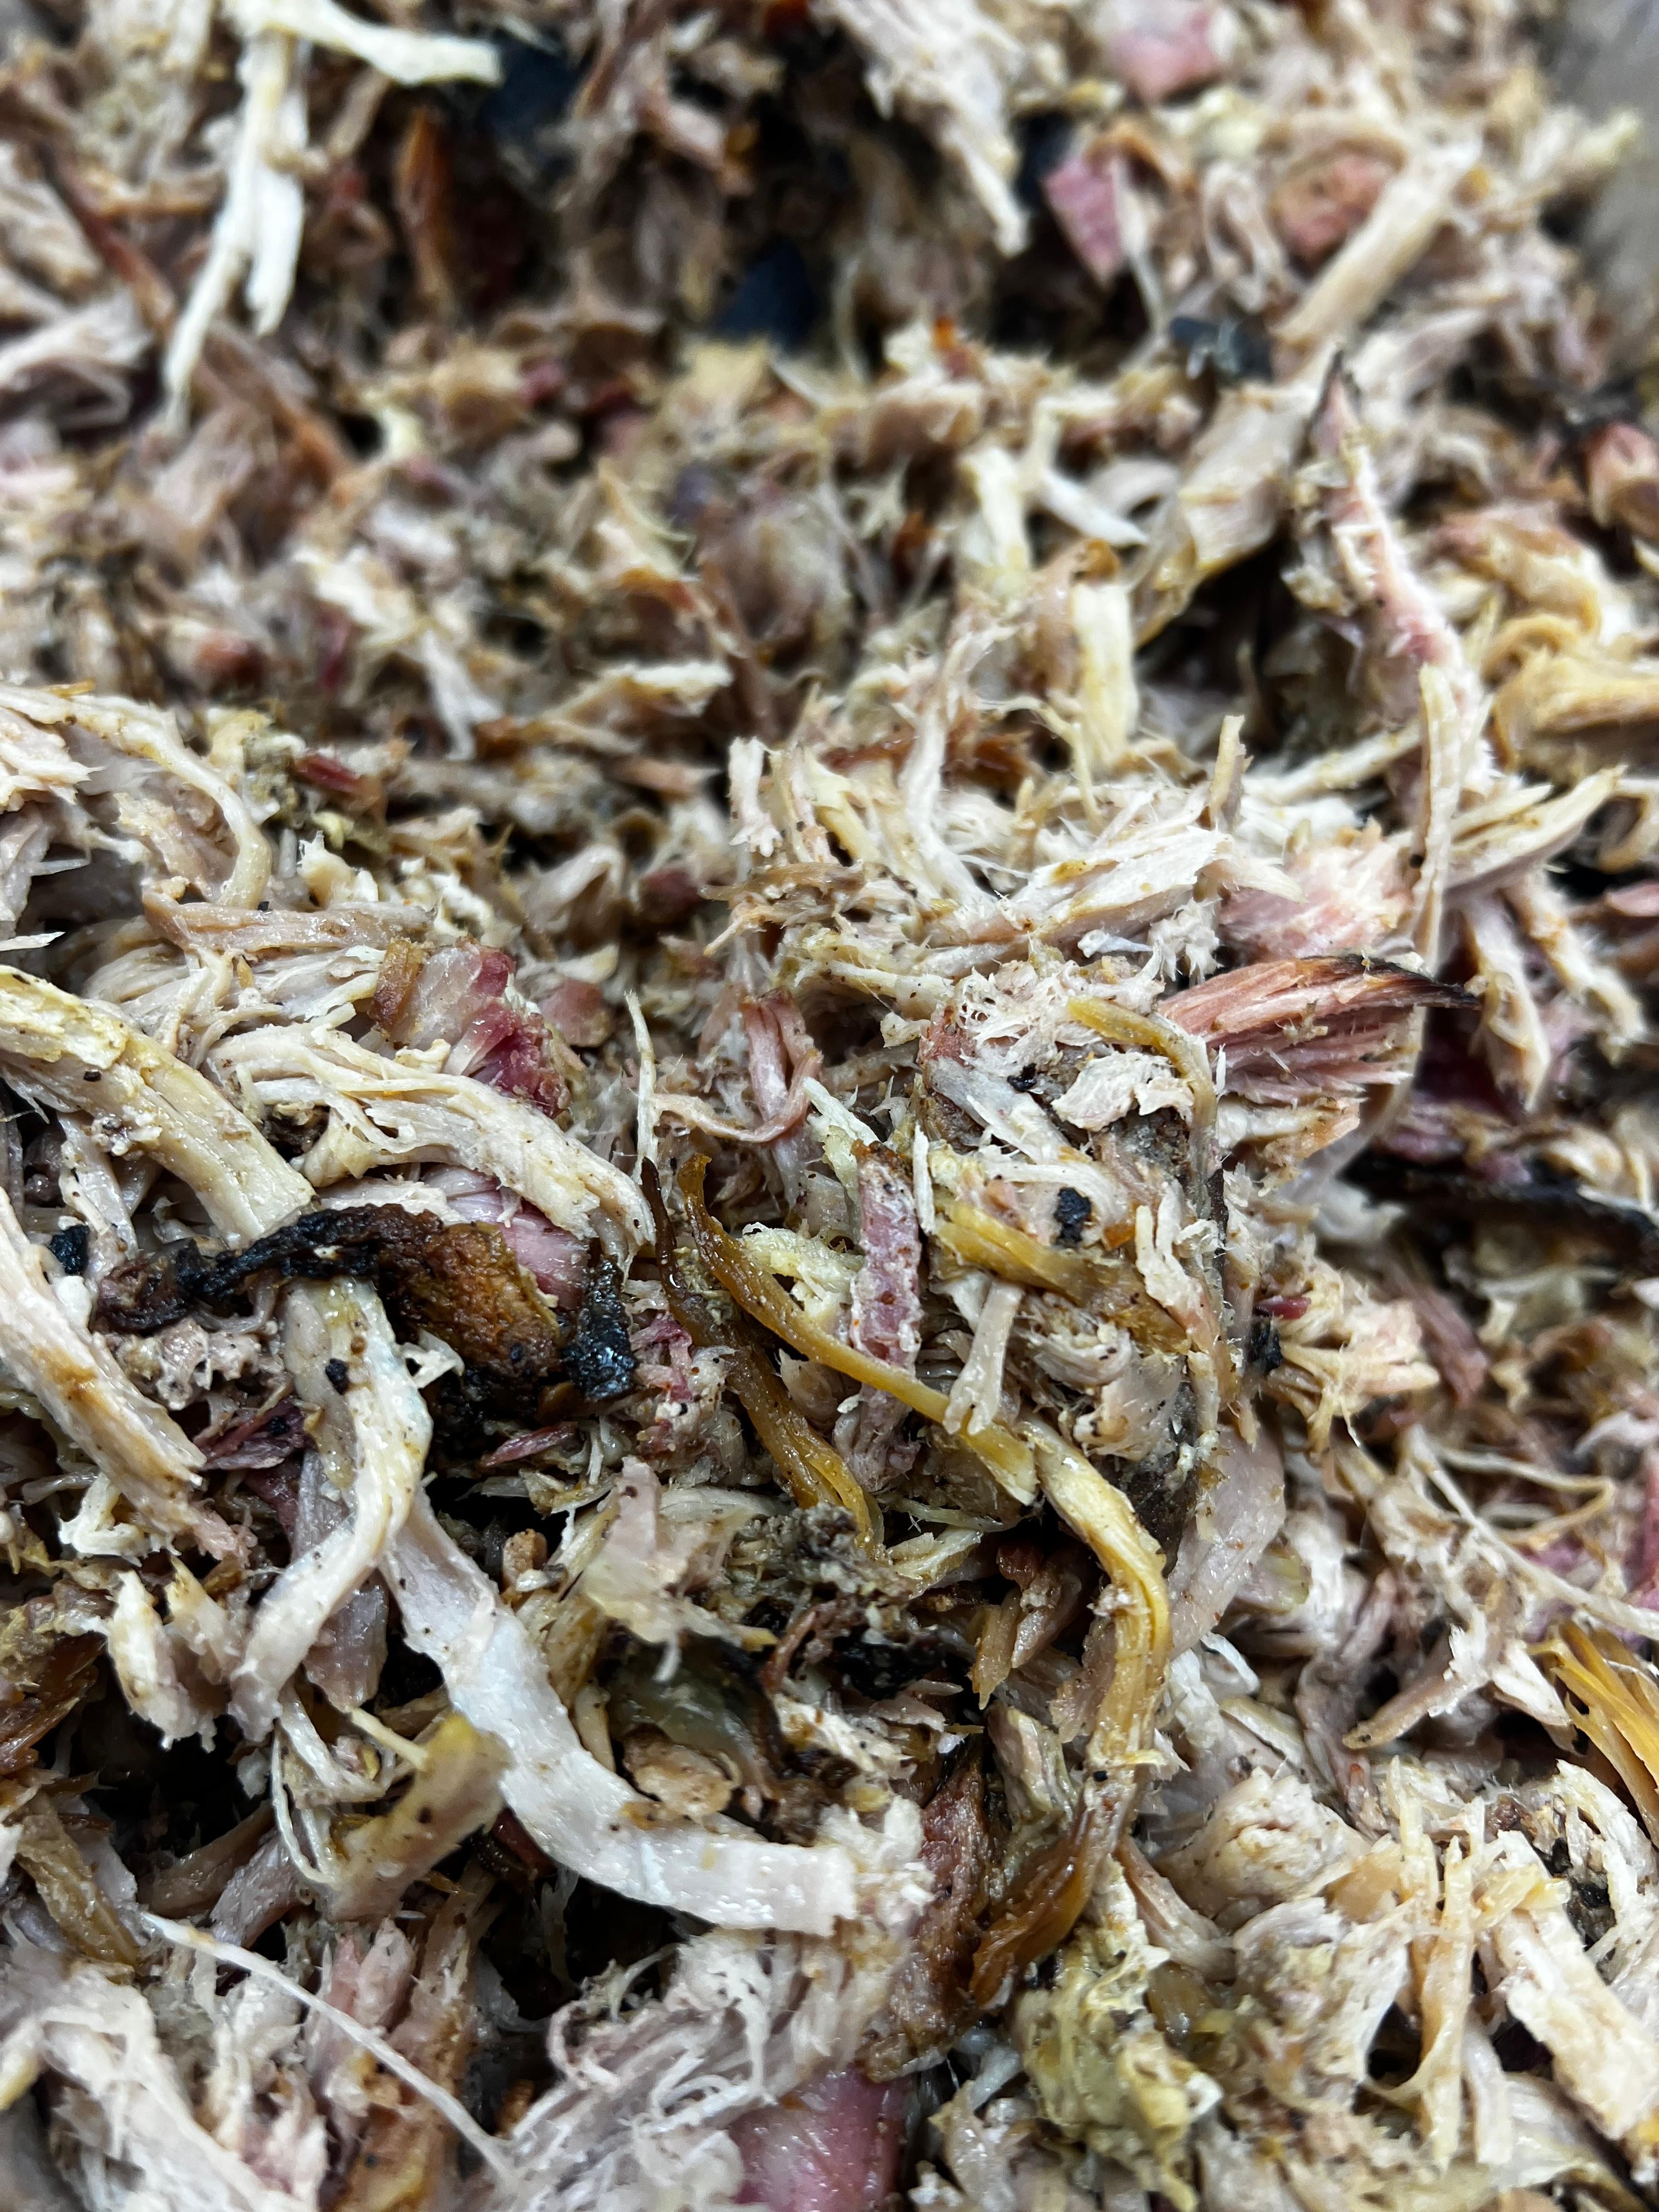 Pulled pork by the pound